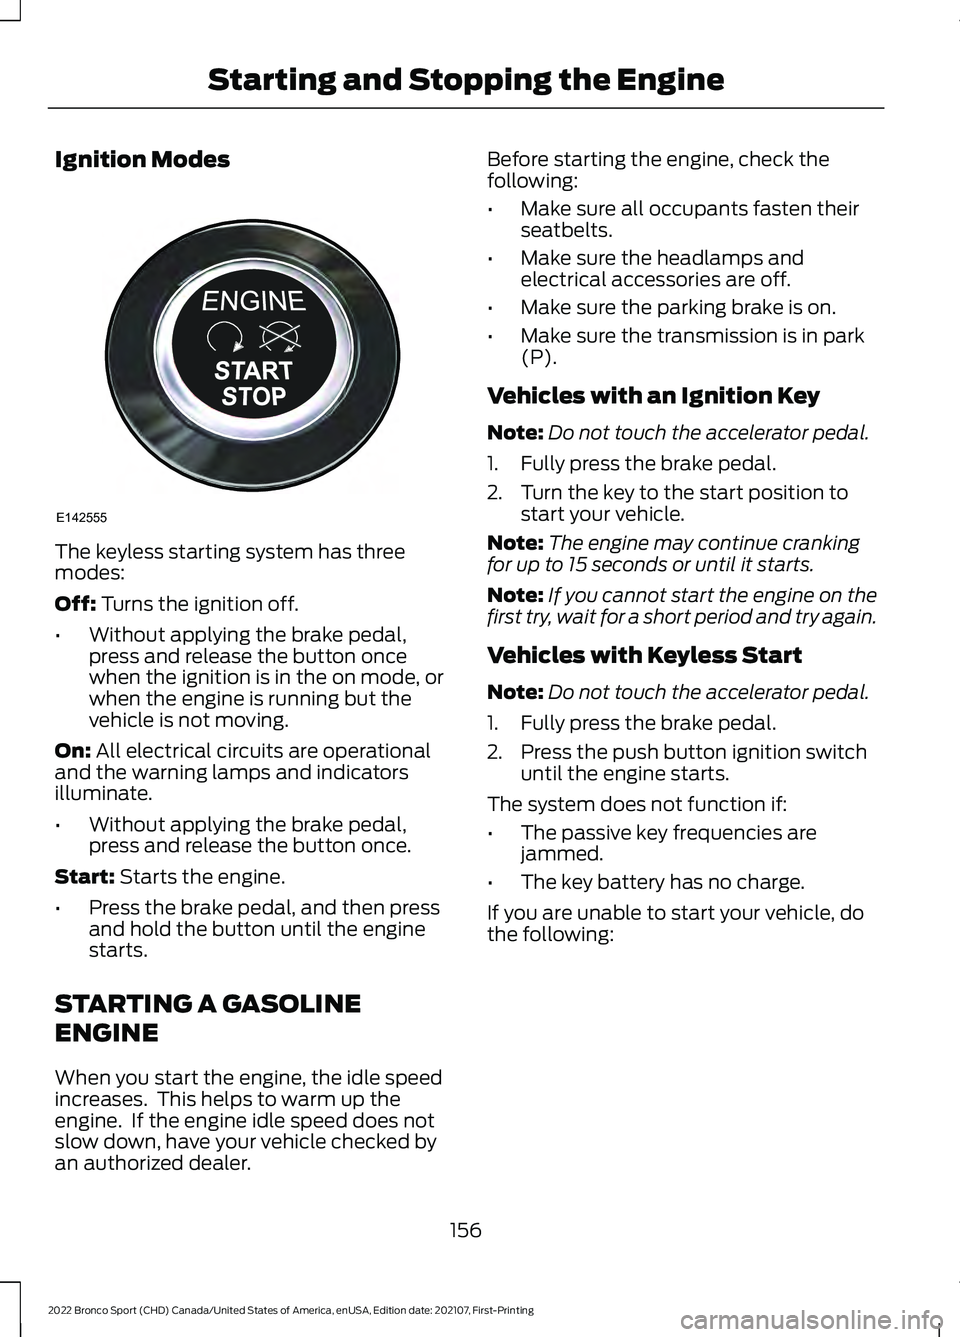 FORD BRONCO SPORT 2022  Owners Manual Ignition Modes
The keyless starting system has three
modes:
Off: Turns the ignition off.
• Without applying the brake pedal,
press and release the button once
when the ignition is in the on mode, or